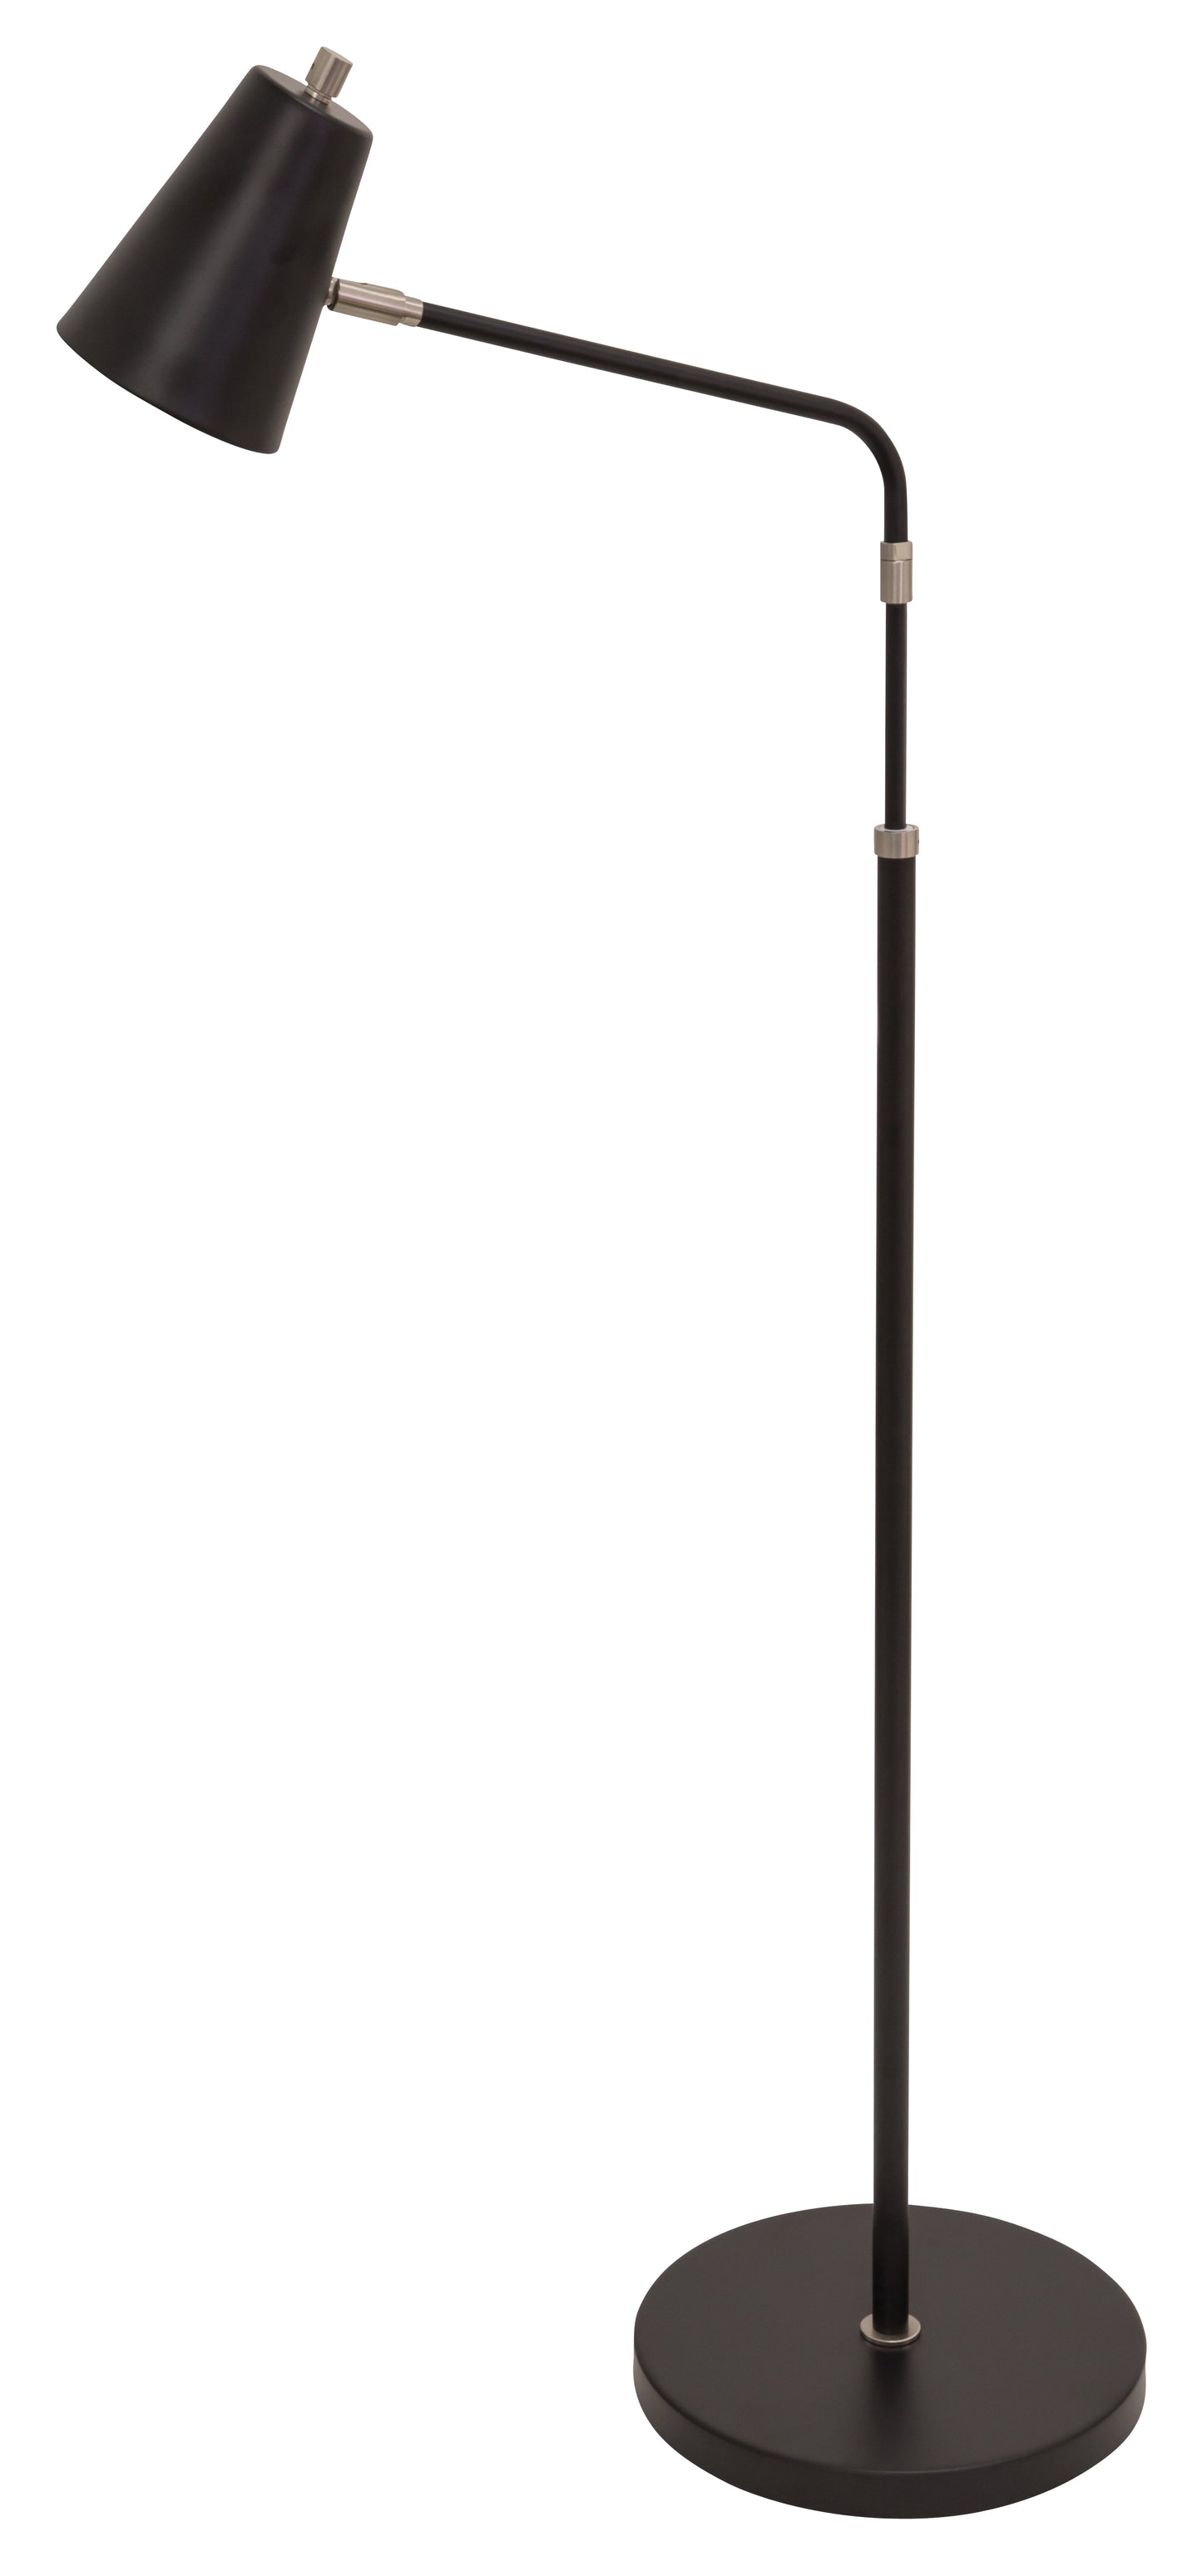 House of Troy Kirby LED adjustable floor lamp in black with satin nickel accents K100-BLK